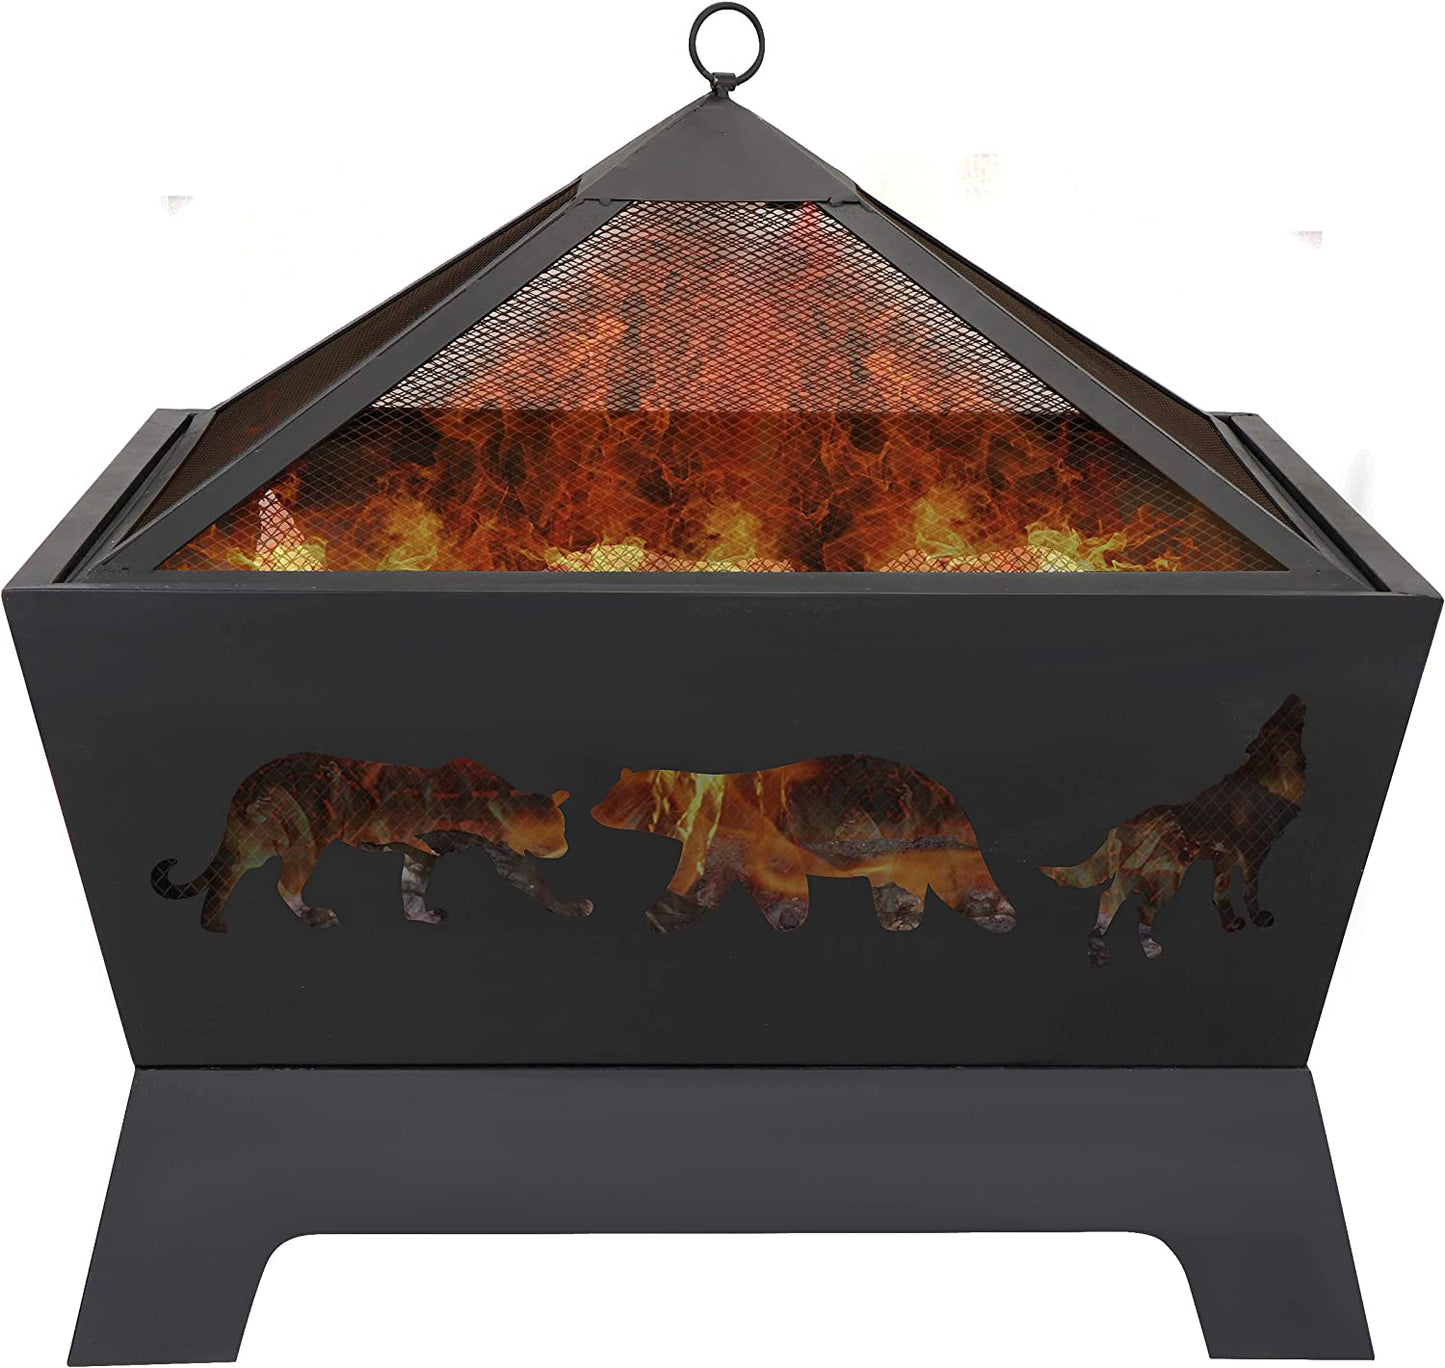 26 inch Fire Pits for Outside Square Firepit Wood Burning Fireplace Heavy Duty Steel Patio Firepit Bowl with Screen Waterproof Cover and Poker for Camping Picnic Bonfire Backyard